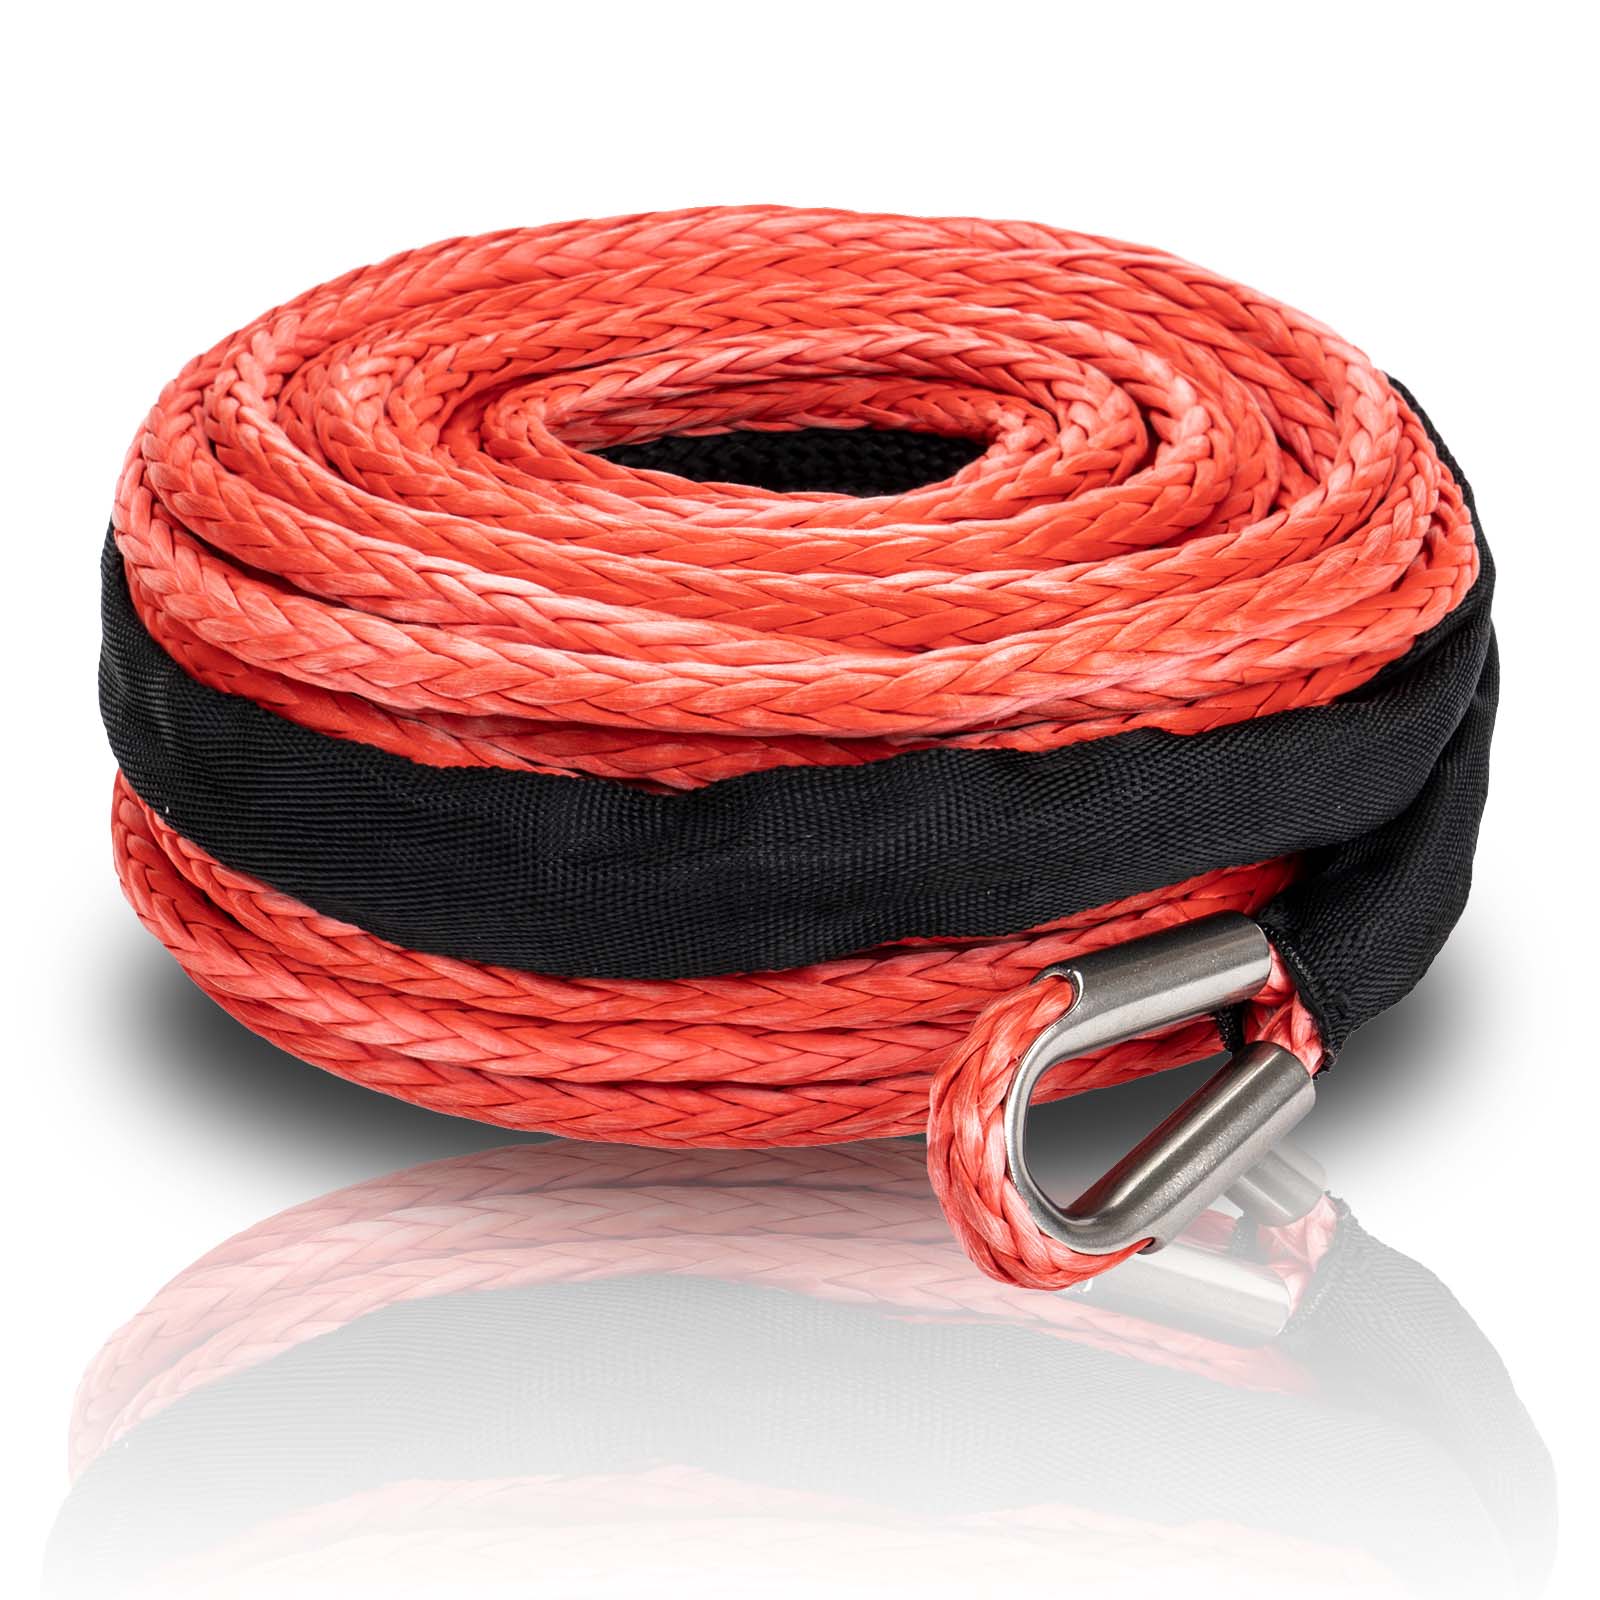 Openroad Synthetic Winch Rope, 3/8 x 85'-18000 lbs Winch Line Rope Replacement with Protective Sleeve/Rope Winch Hook, Red